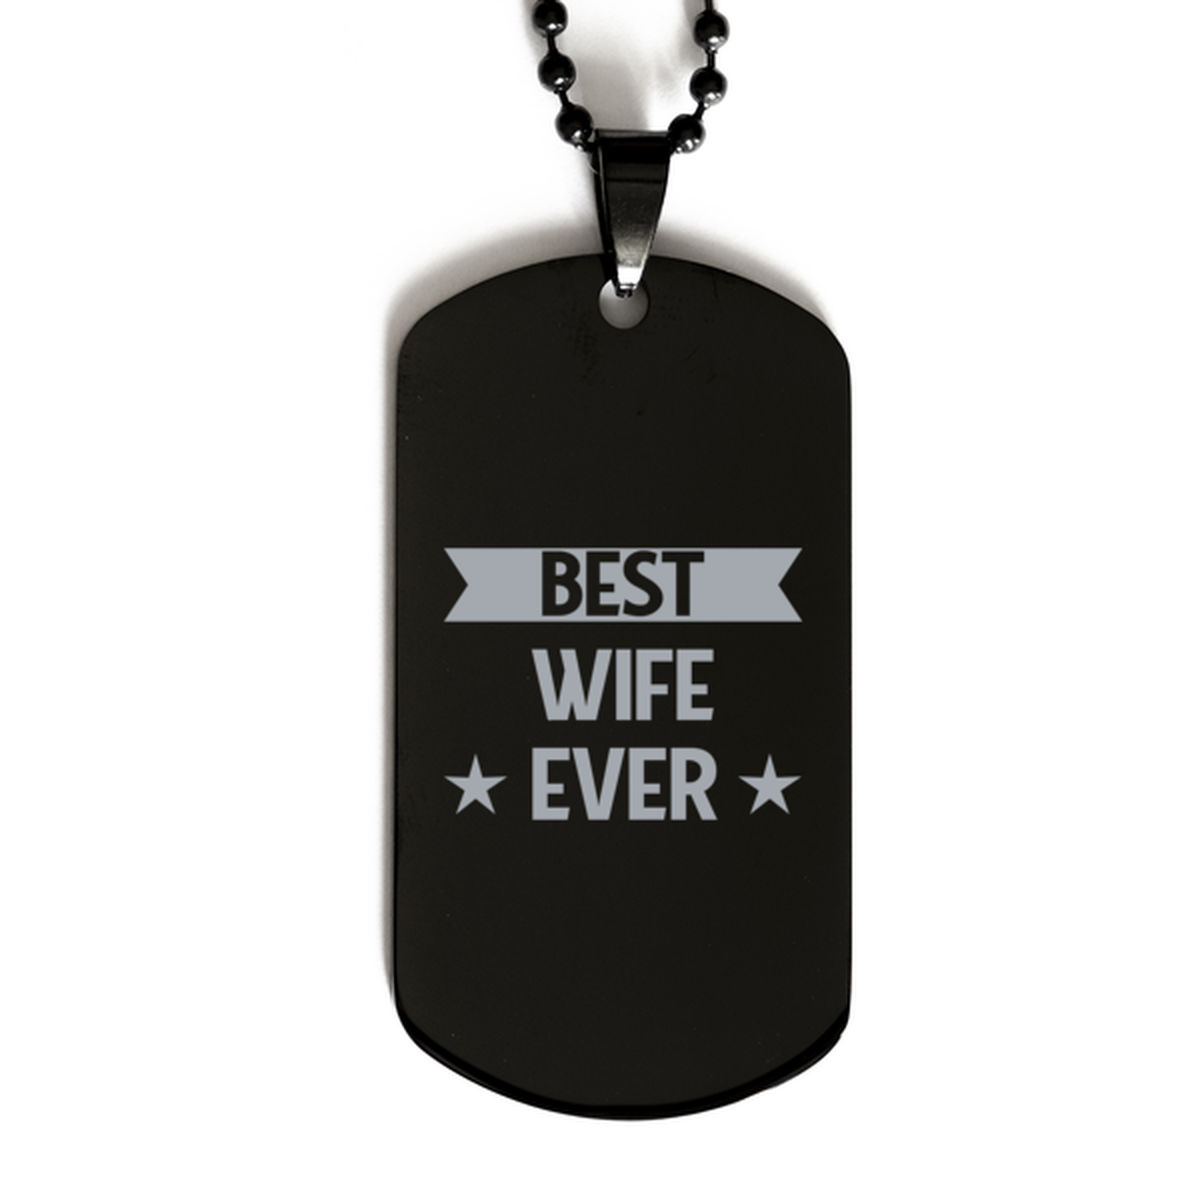 Best Wife Ever Wife Gifts, Funny Black Dog Tag For Wife, Birthday Family Presents Engraved Necklace For Women